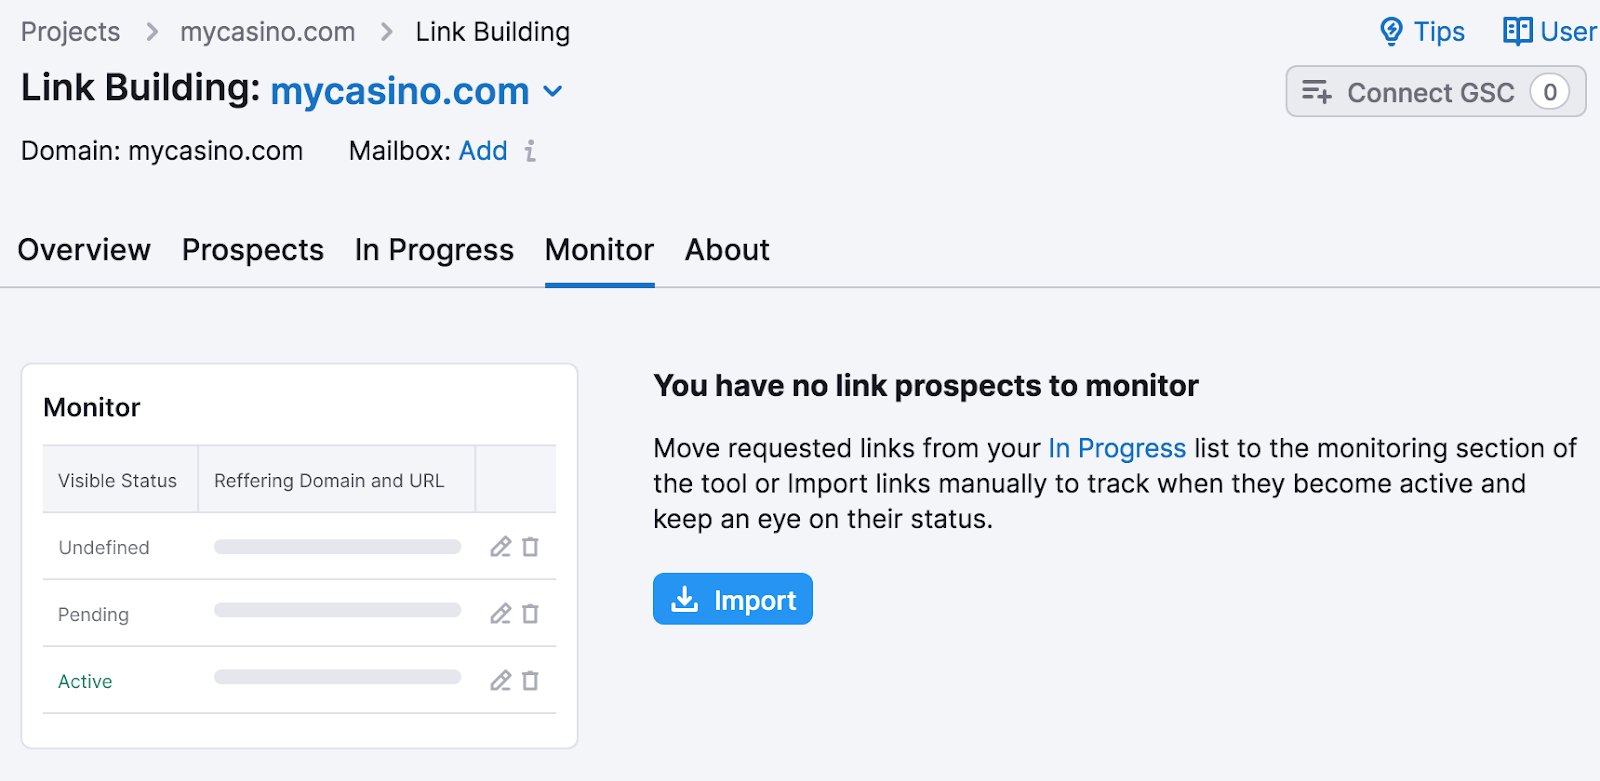 "Monitor" tab in the Link Building tool